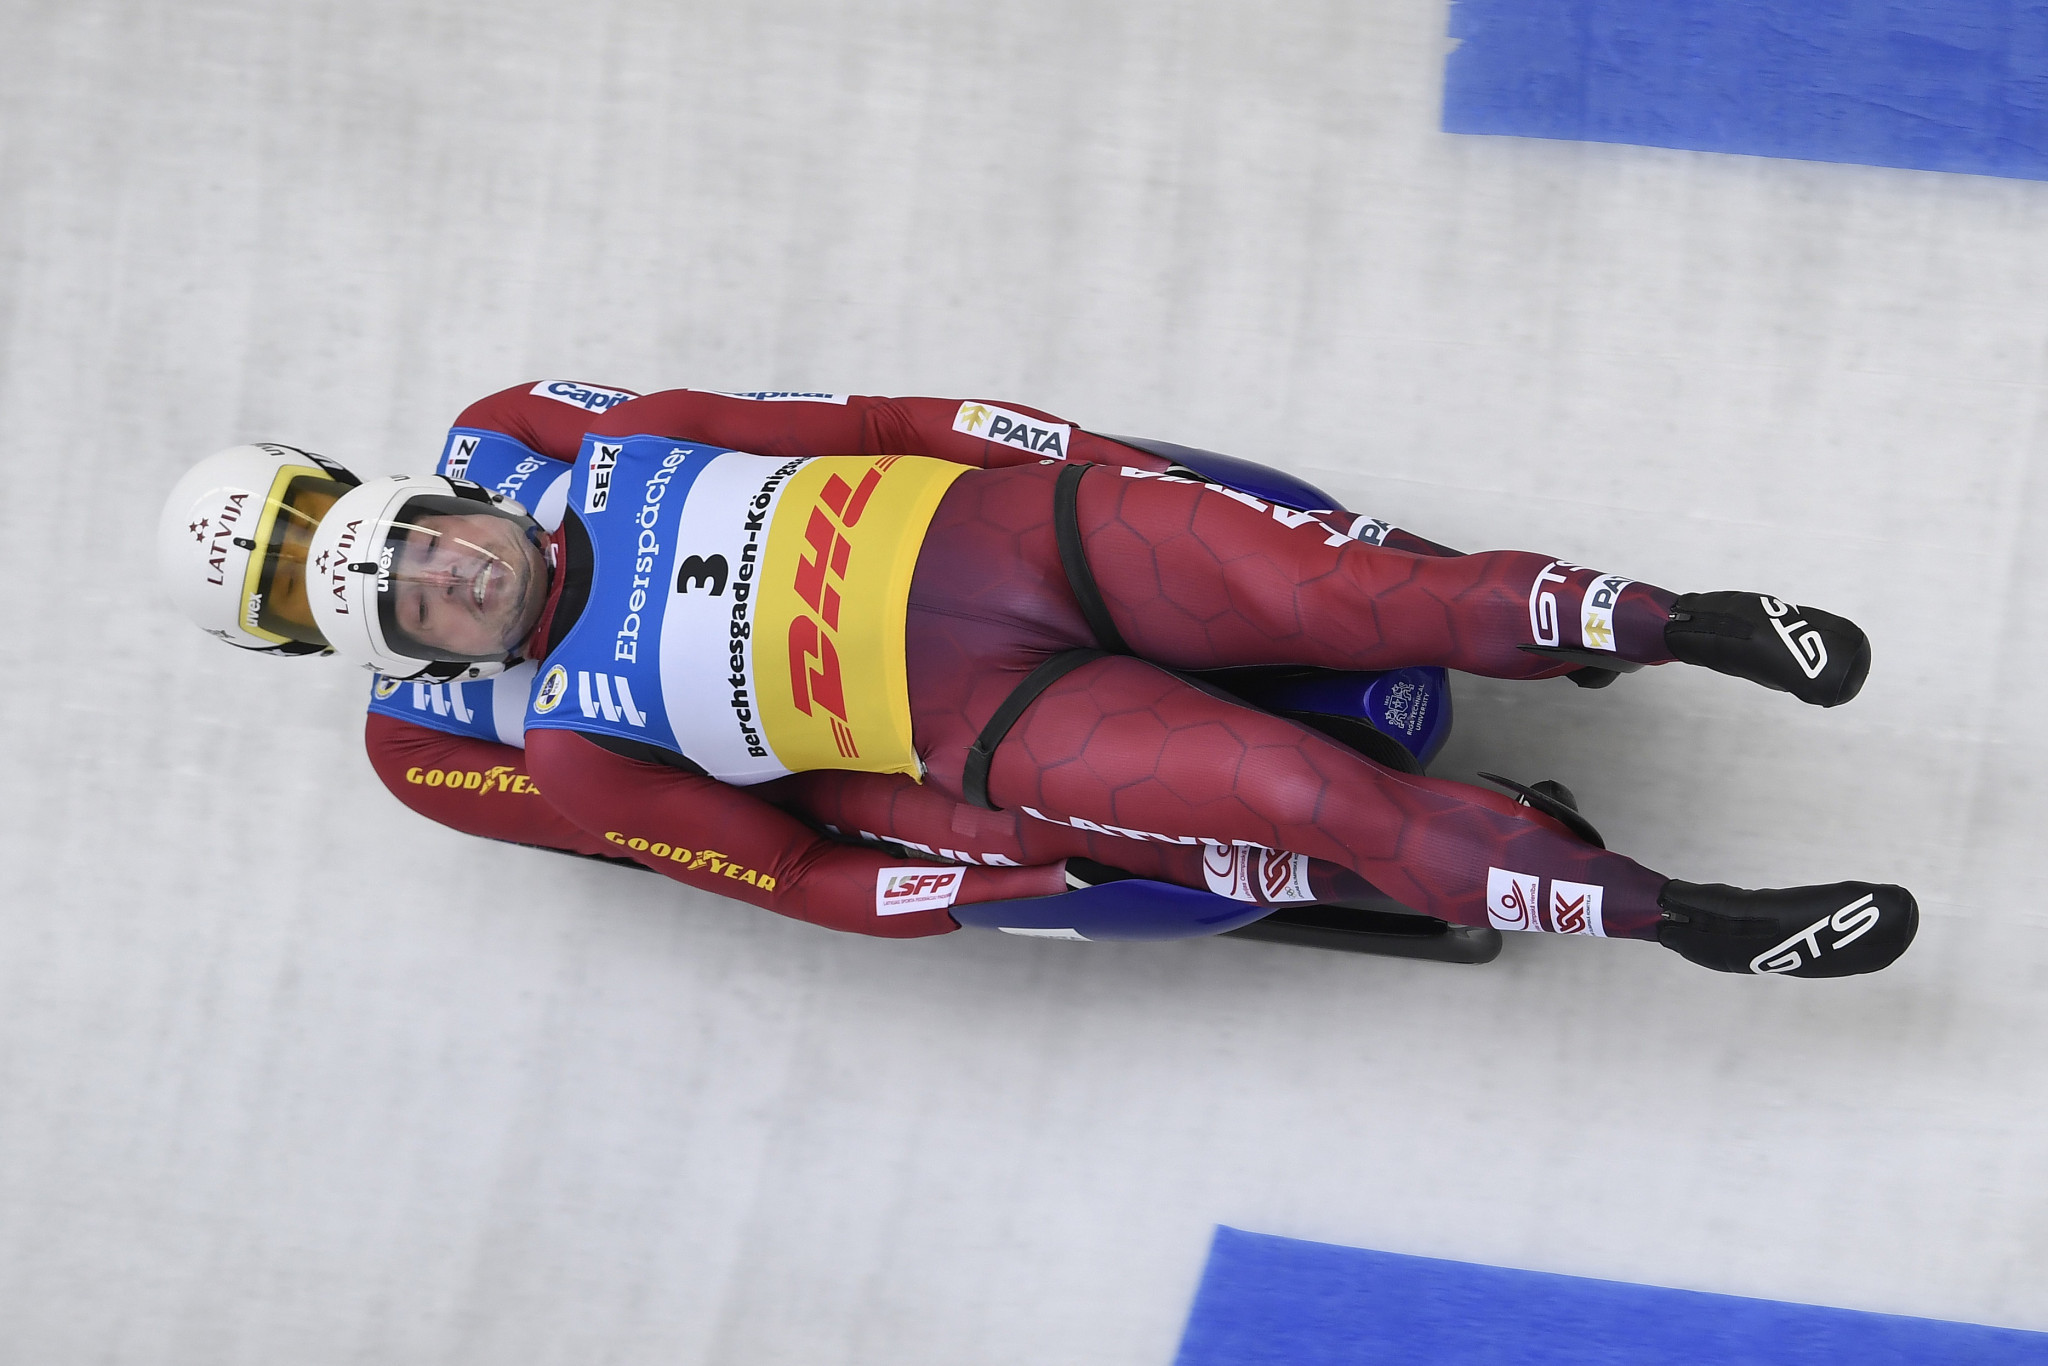 Andris and Juris Šics got the better of Toni Eggert and Sascha Benecken in the doubles sprint race in Sigulda ©Getty Images